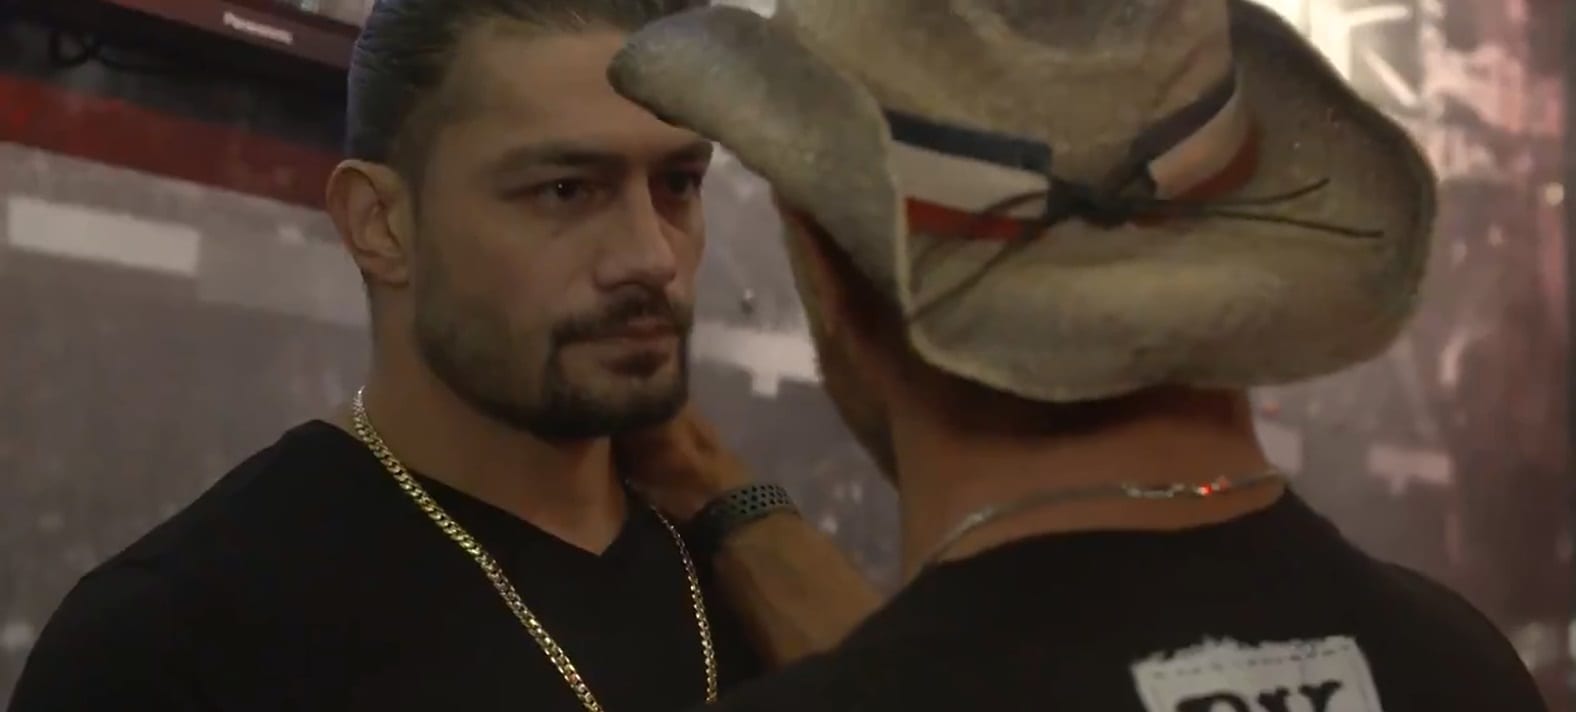 Roman Reigns Receives Emotional Goodbye In Gorilla Position Following Leukemia Announcement On Raw